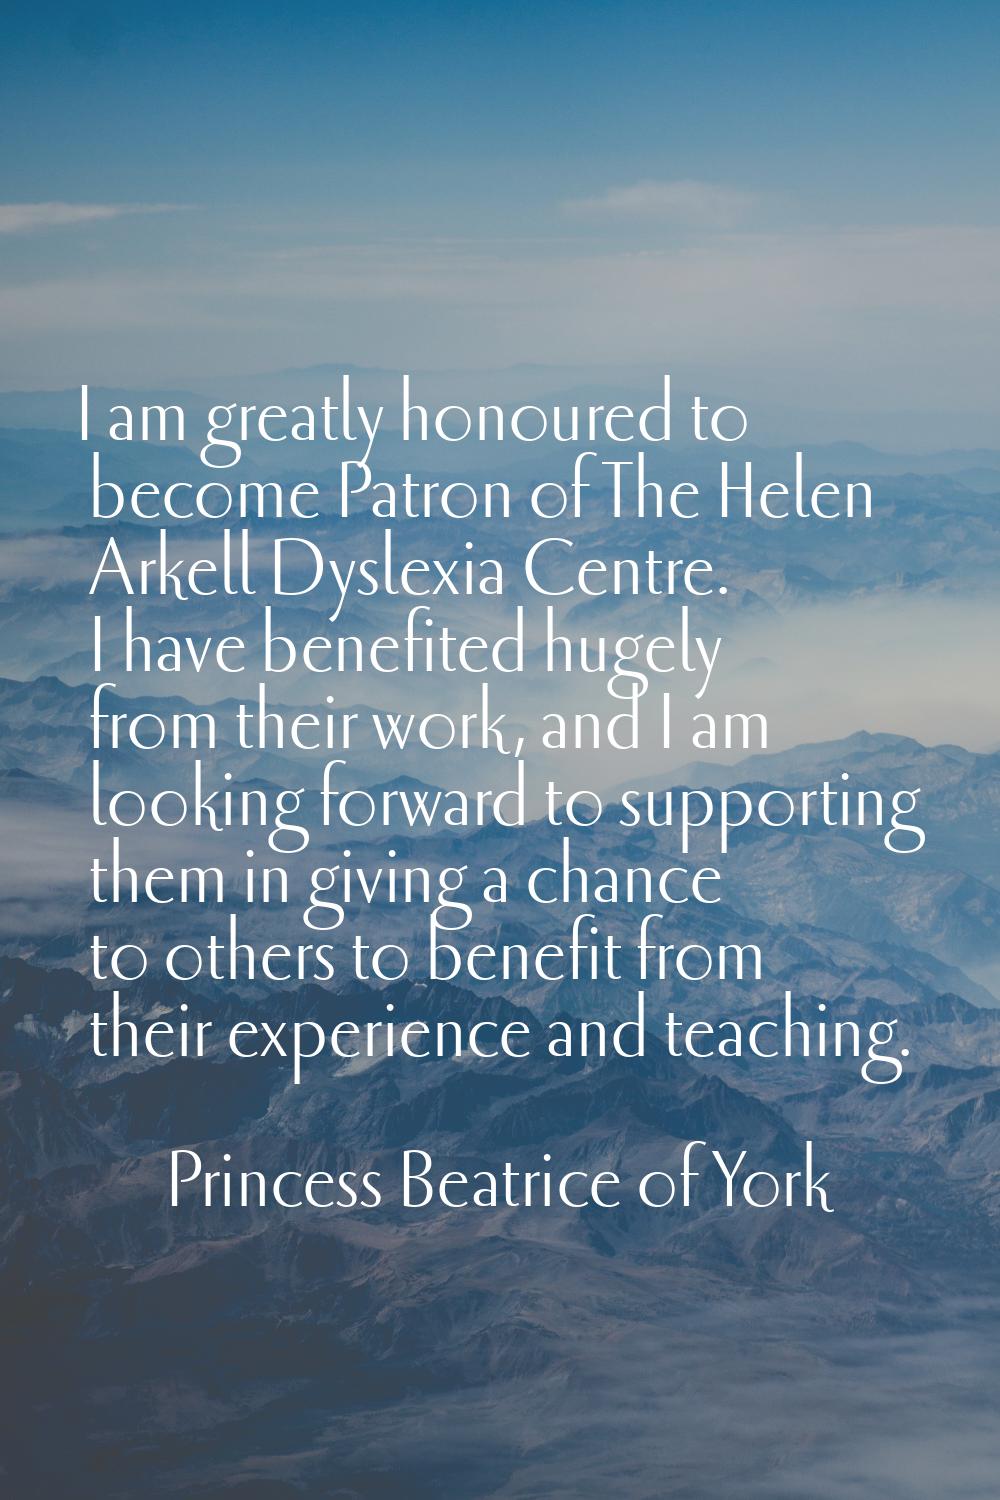 I am greatly honoured to become Patron of The Helen Arkell Dyslexia Centre. I have benefited hugely